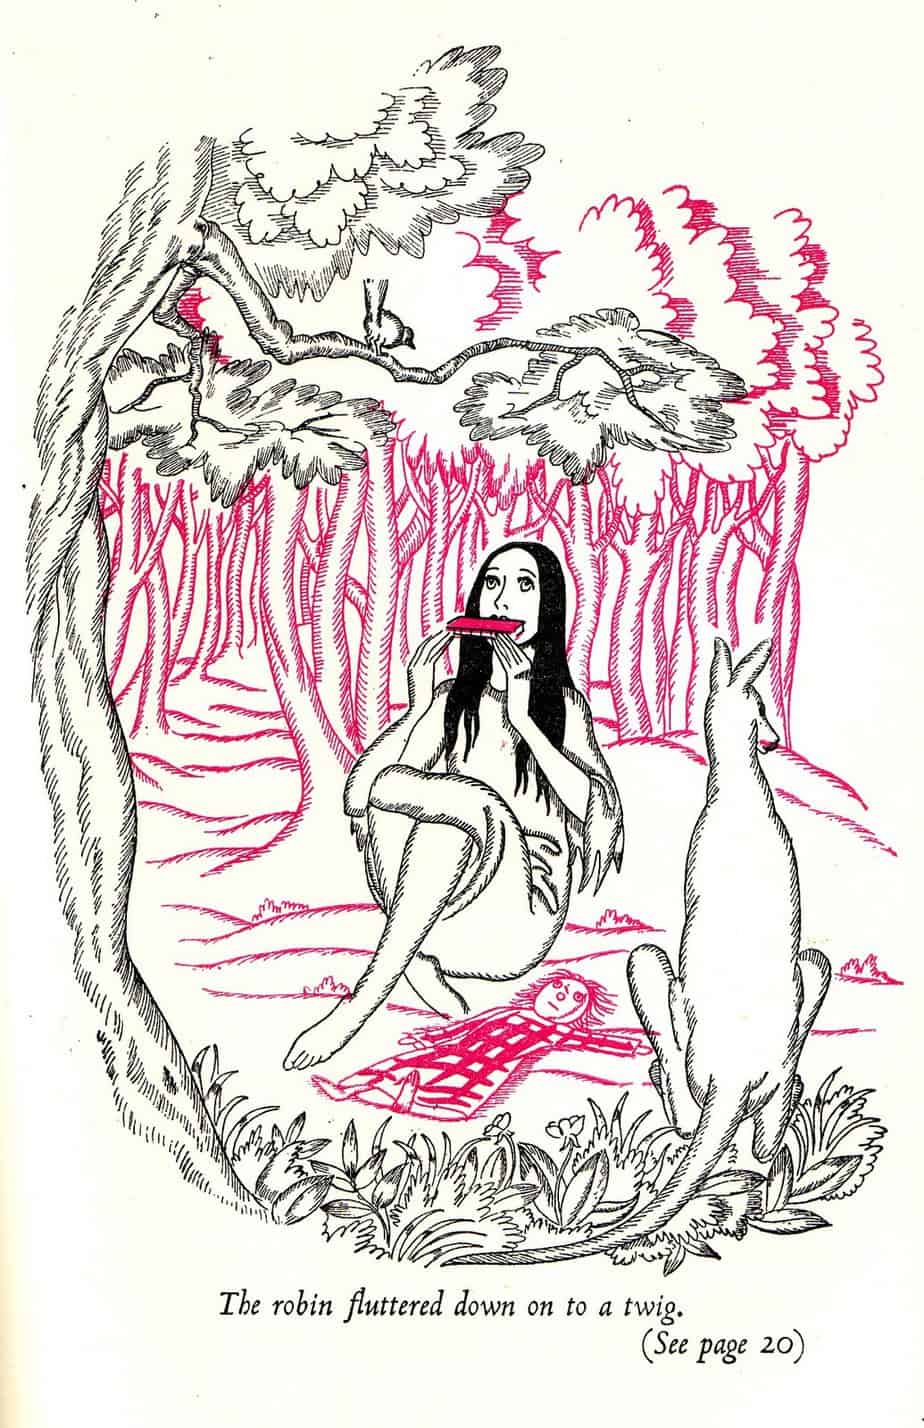 A woman plays a harmonica in a forest full of pink trunked trees. A kangaroo watches.